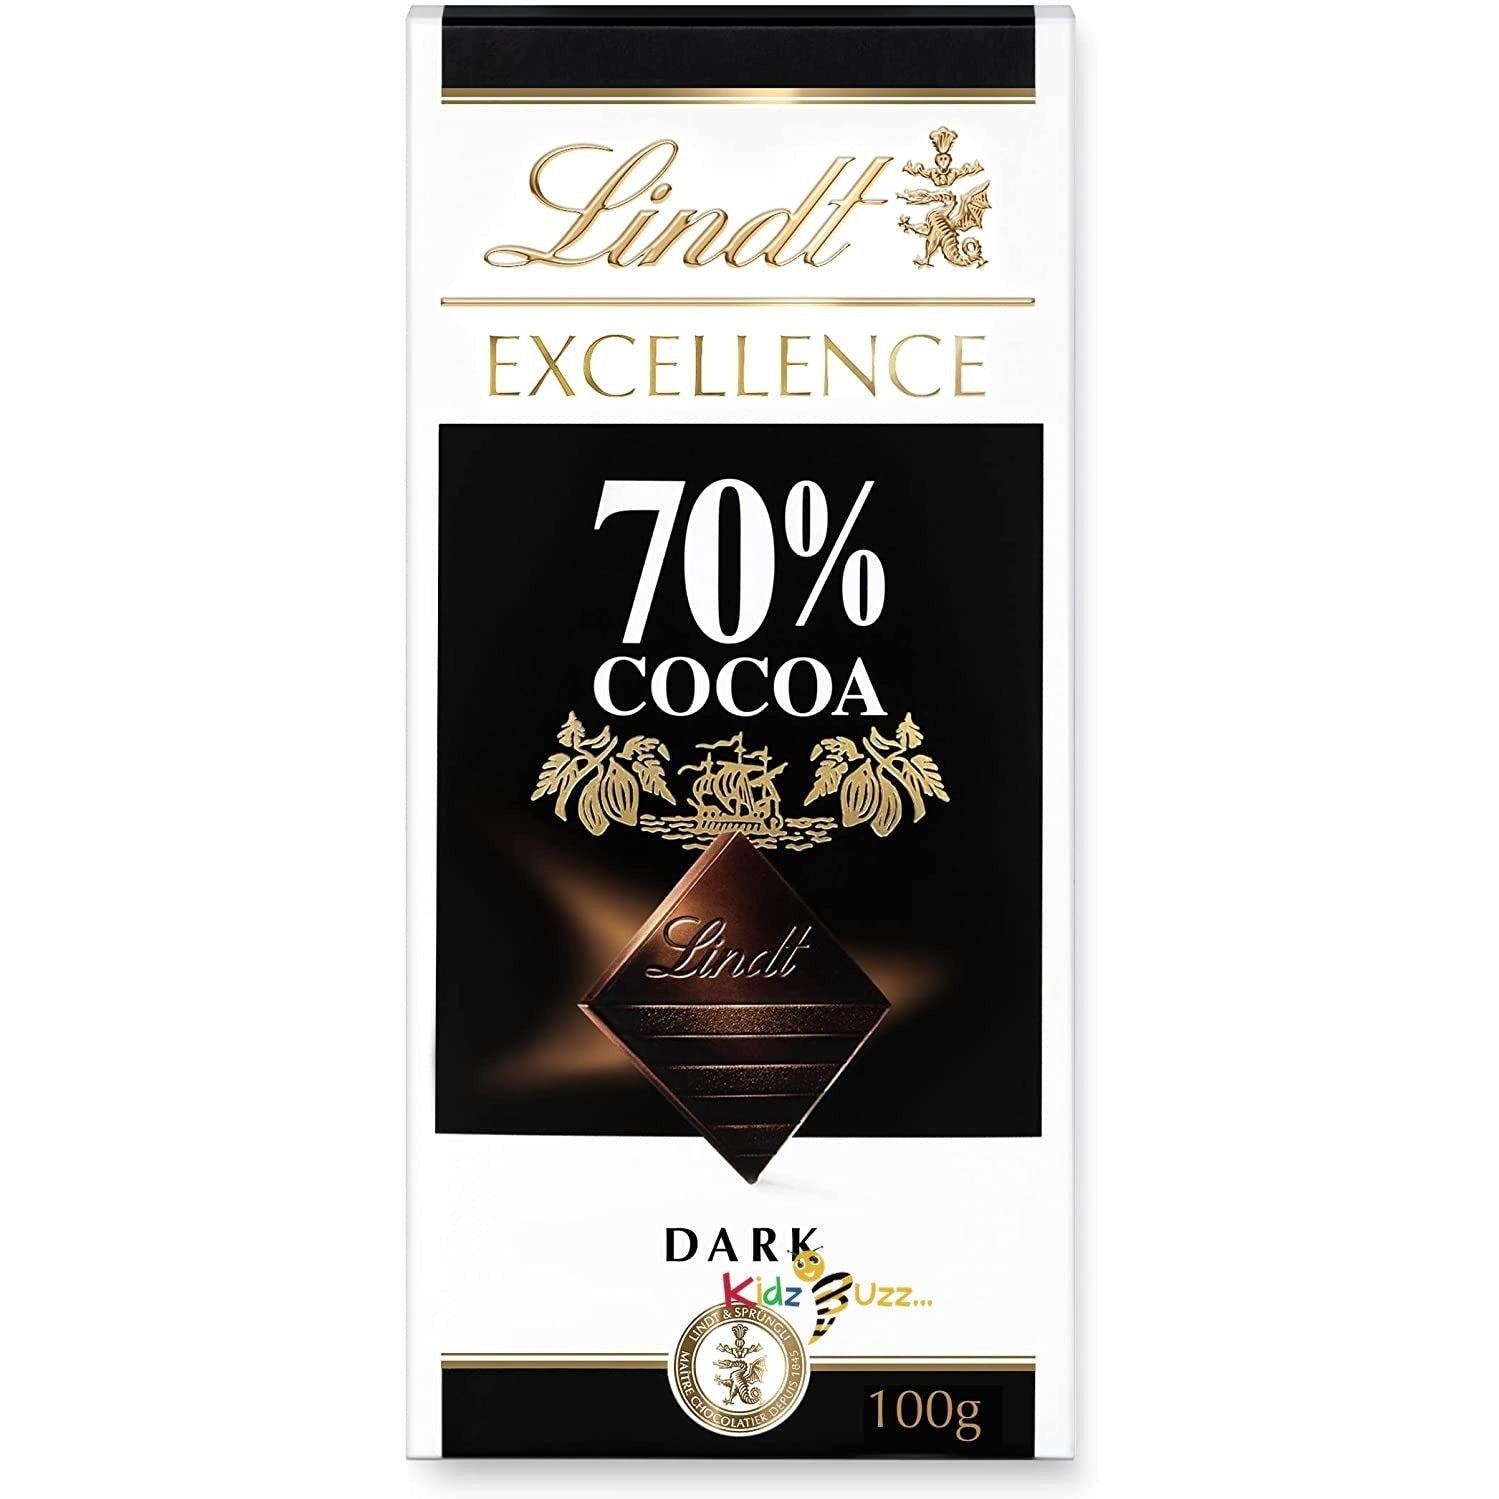 Lindt EXCELLENCE Dark 70% Cocoa Chocolate Bar - 100 g